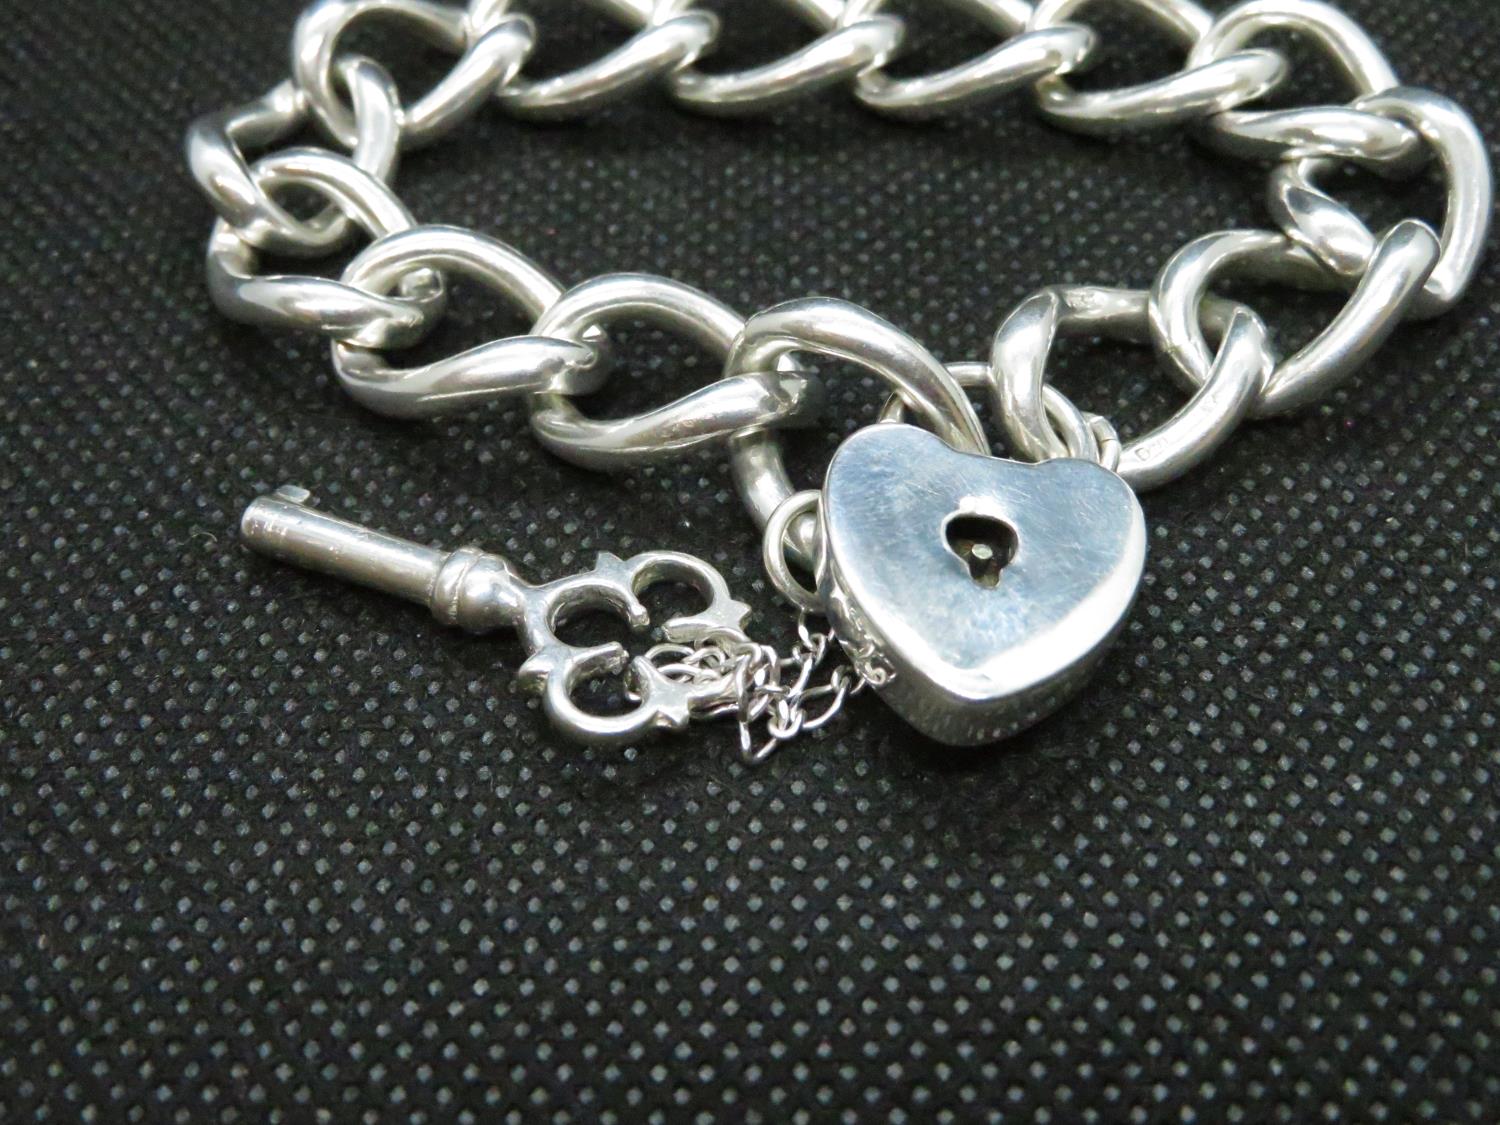 Silver bracelet with key and padlock 31g - Image 2 of 2